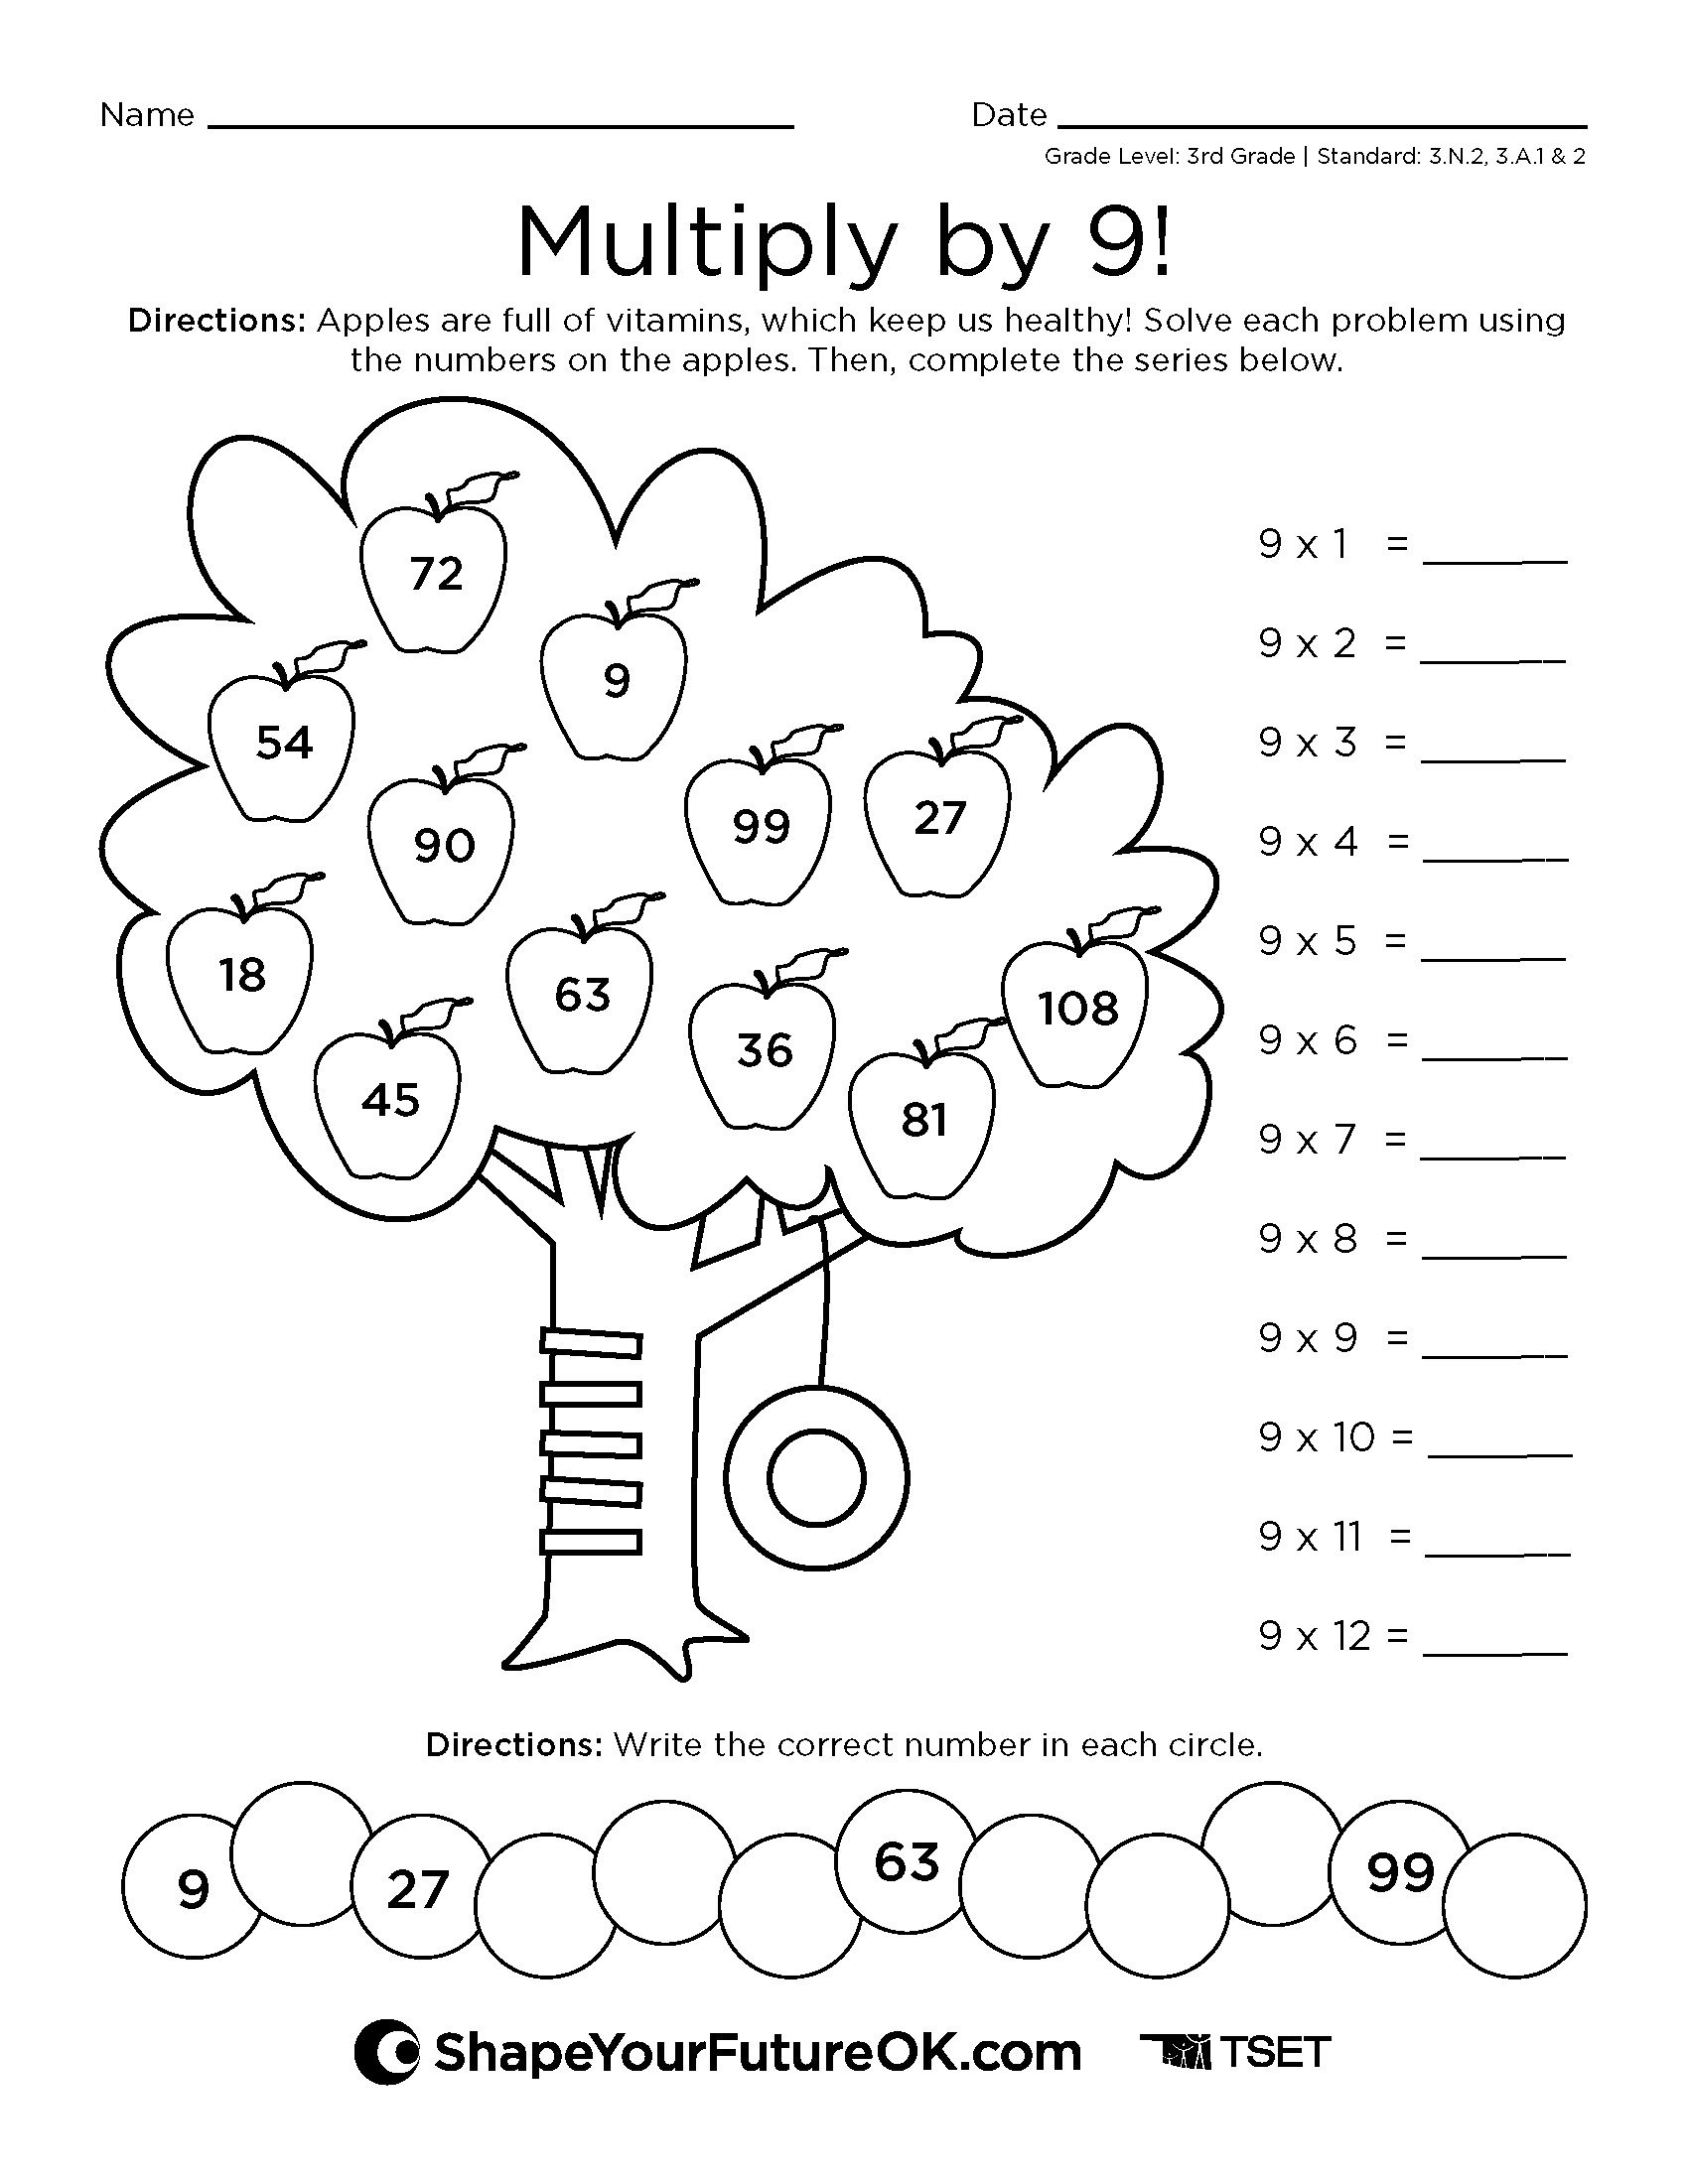 Multiply by 9: 3rd Grade download